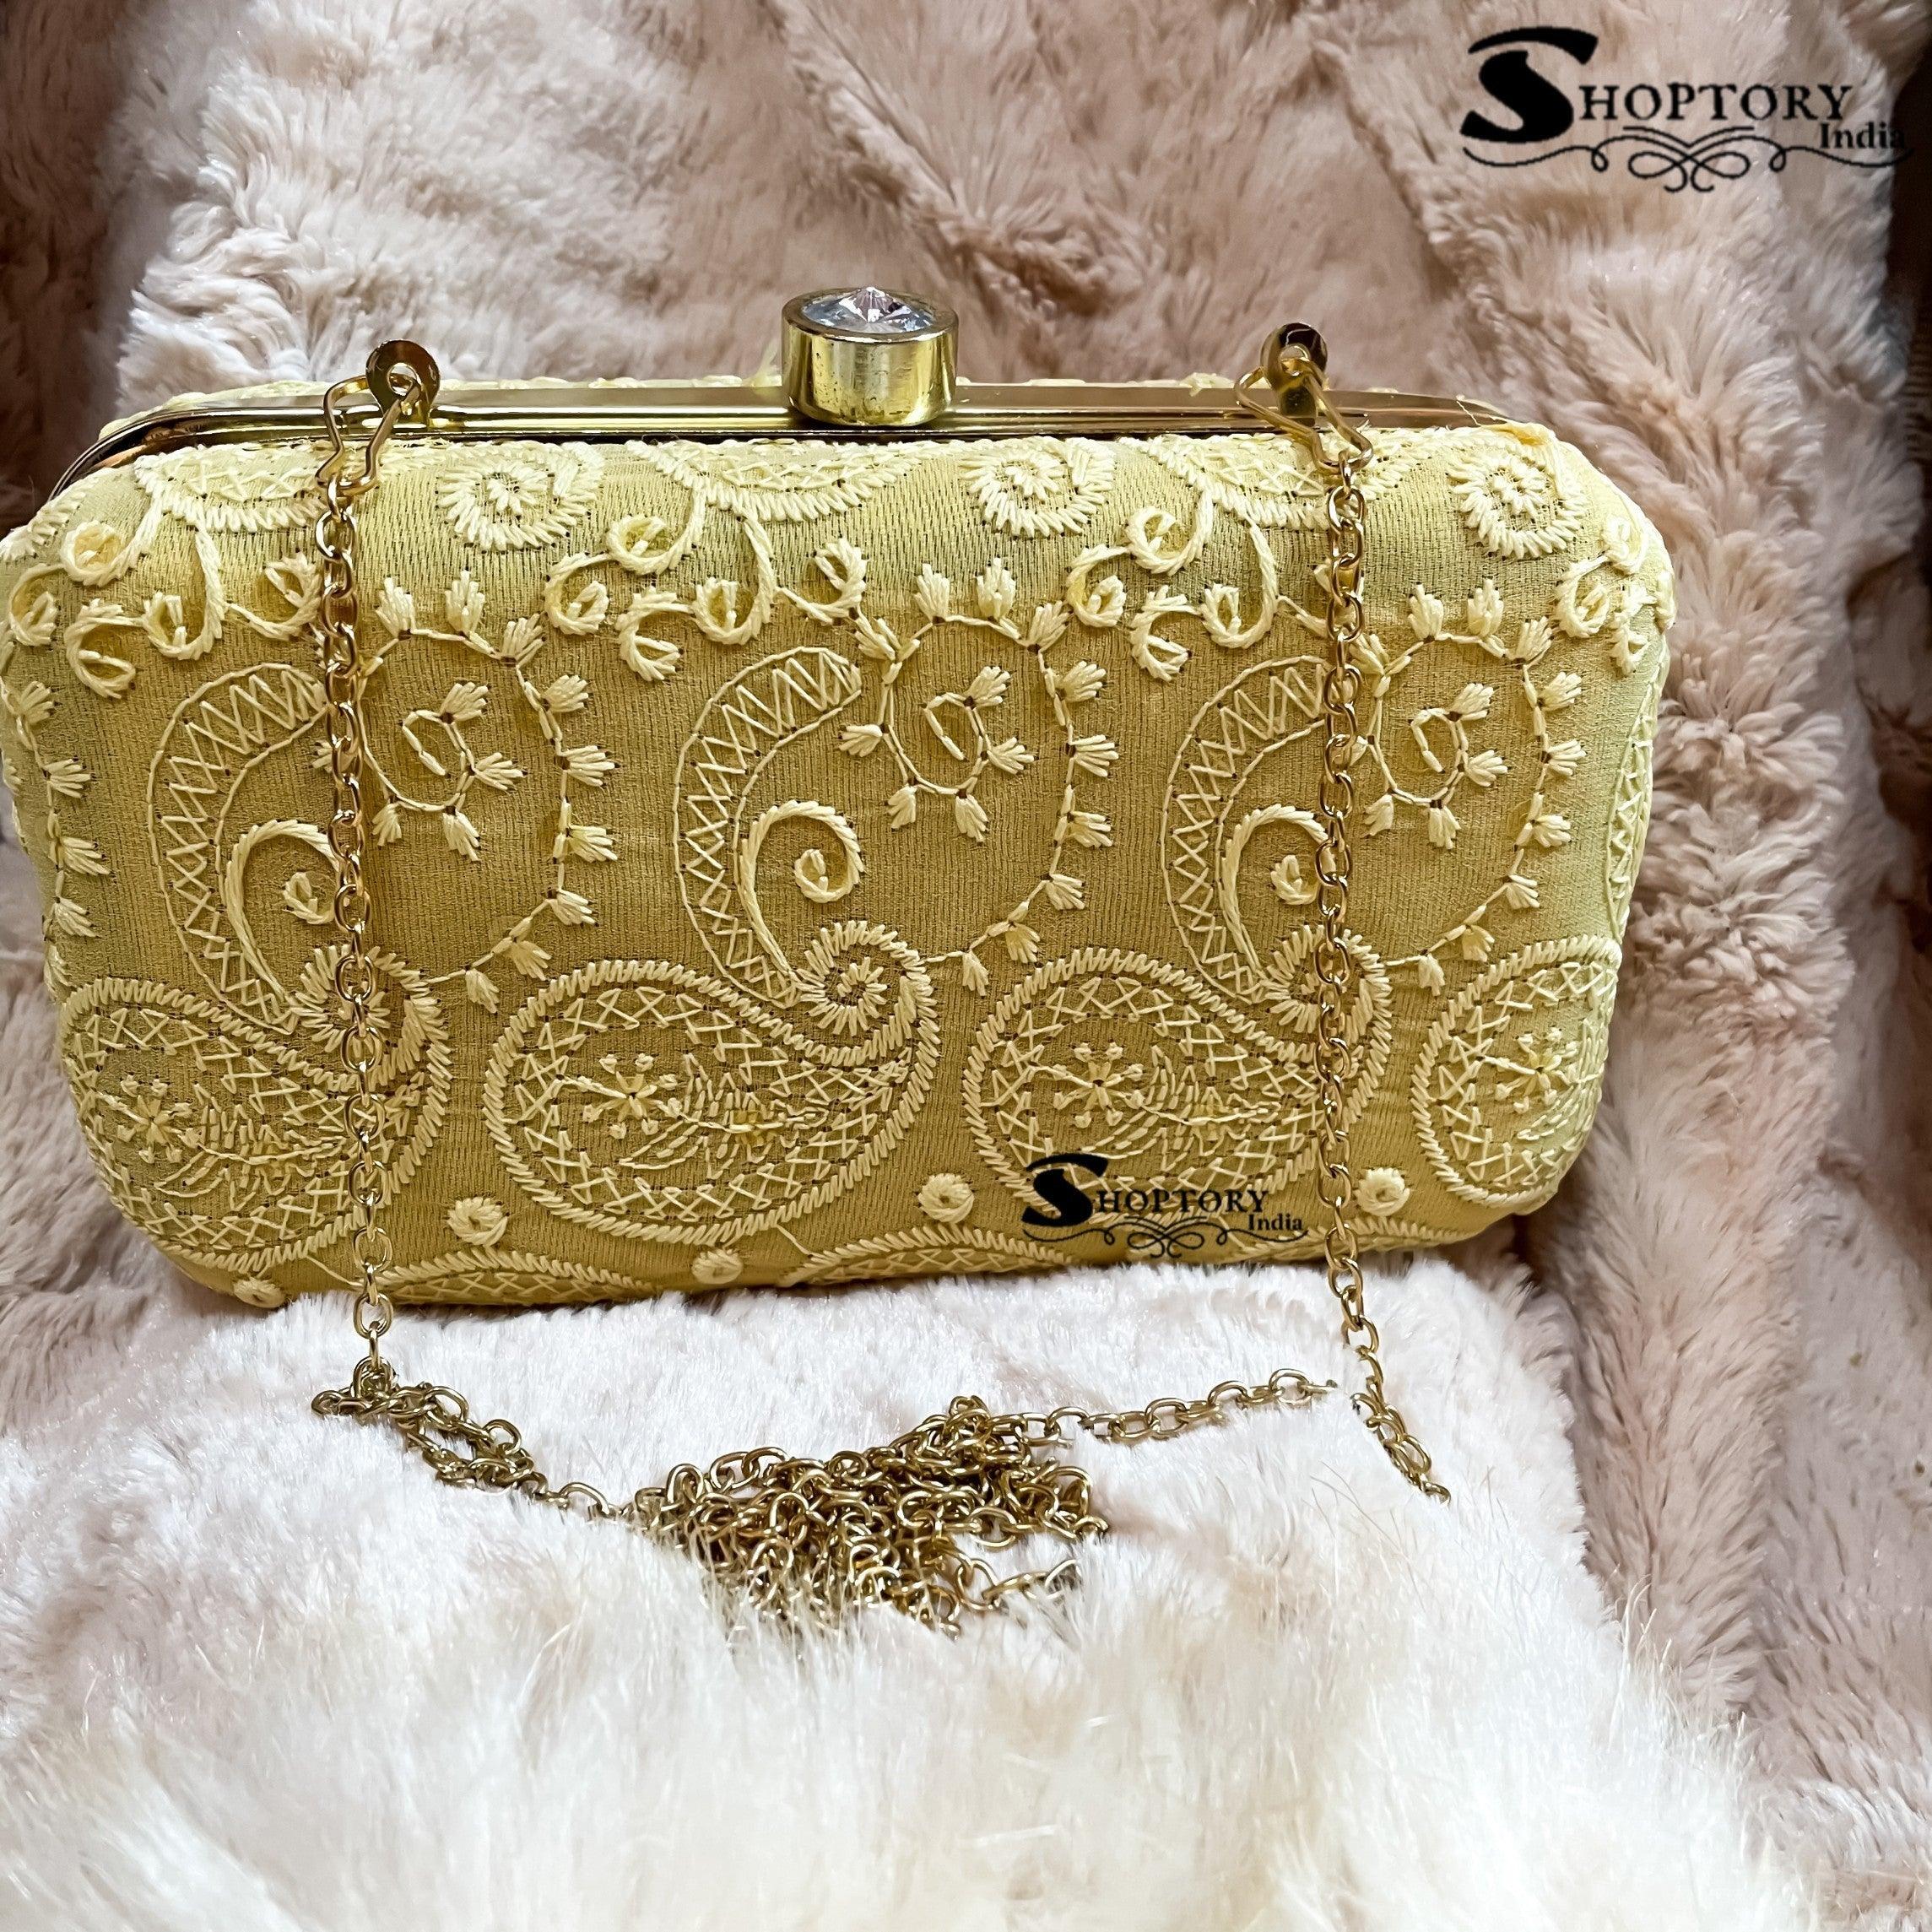 Shop for Stylish Trendy Women Party Wear clutch Purse (Cycle with Balloons)  Online at Lowest Price in India | GRABADEAL